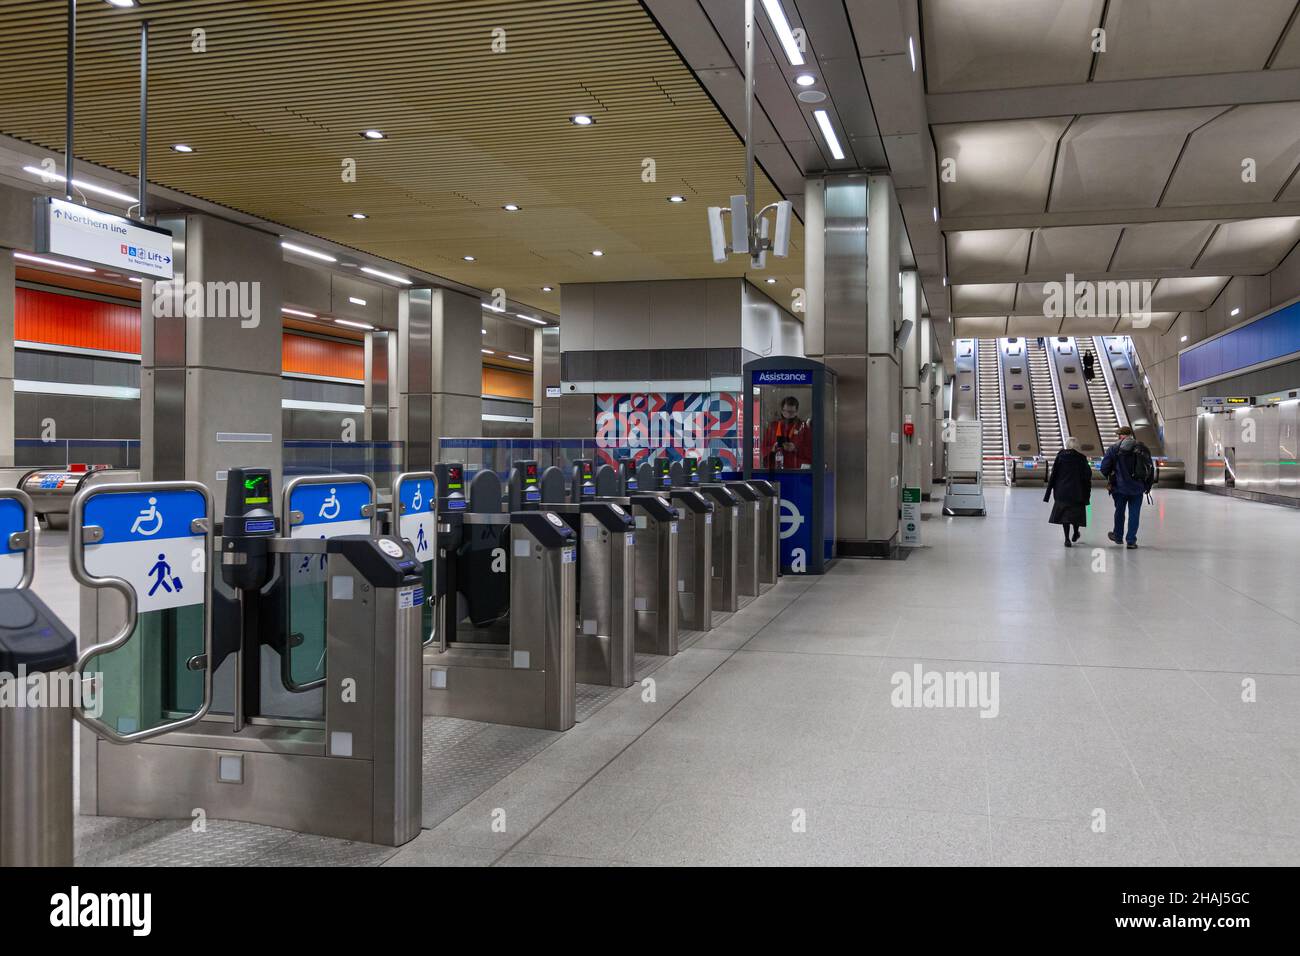 Ticket Barriers in use at Battersea Power Station Stock Photo